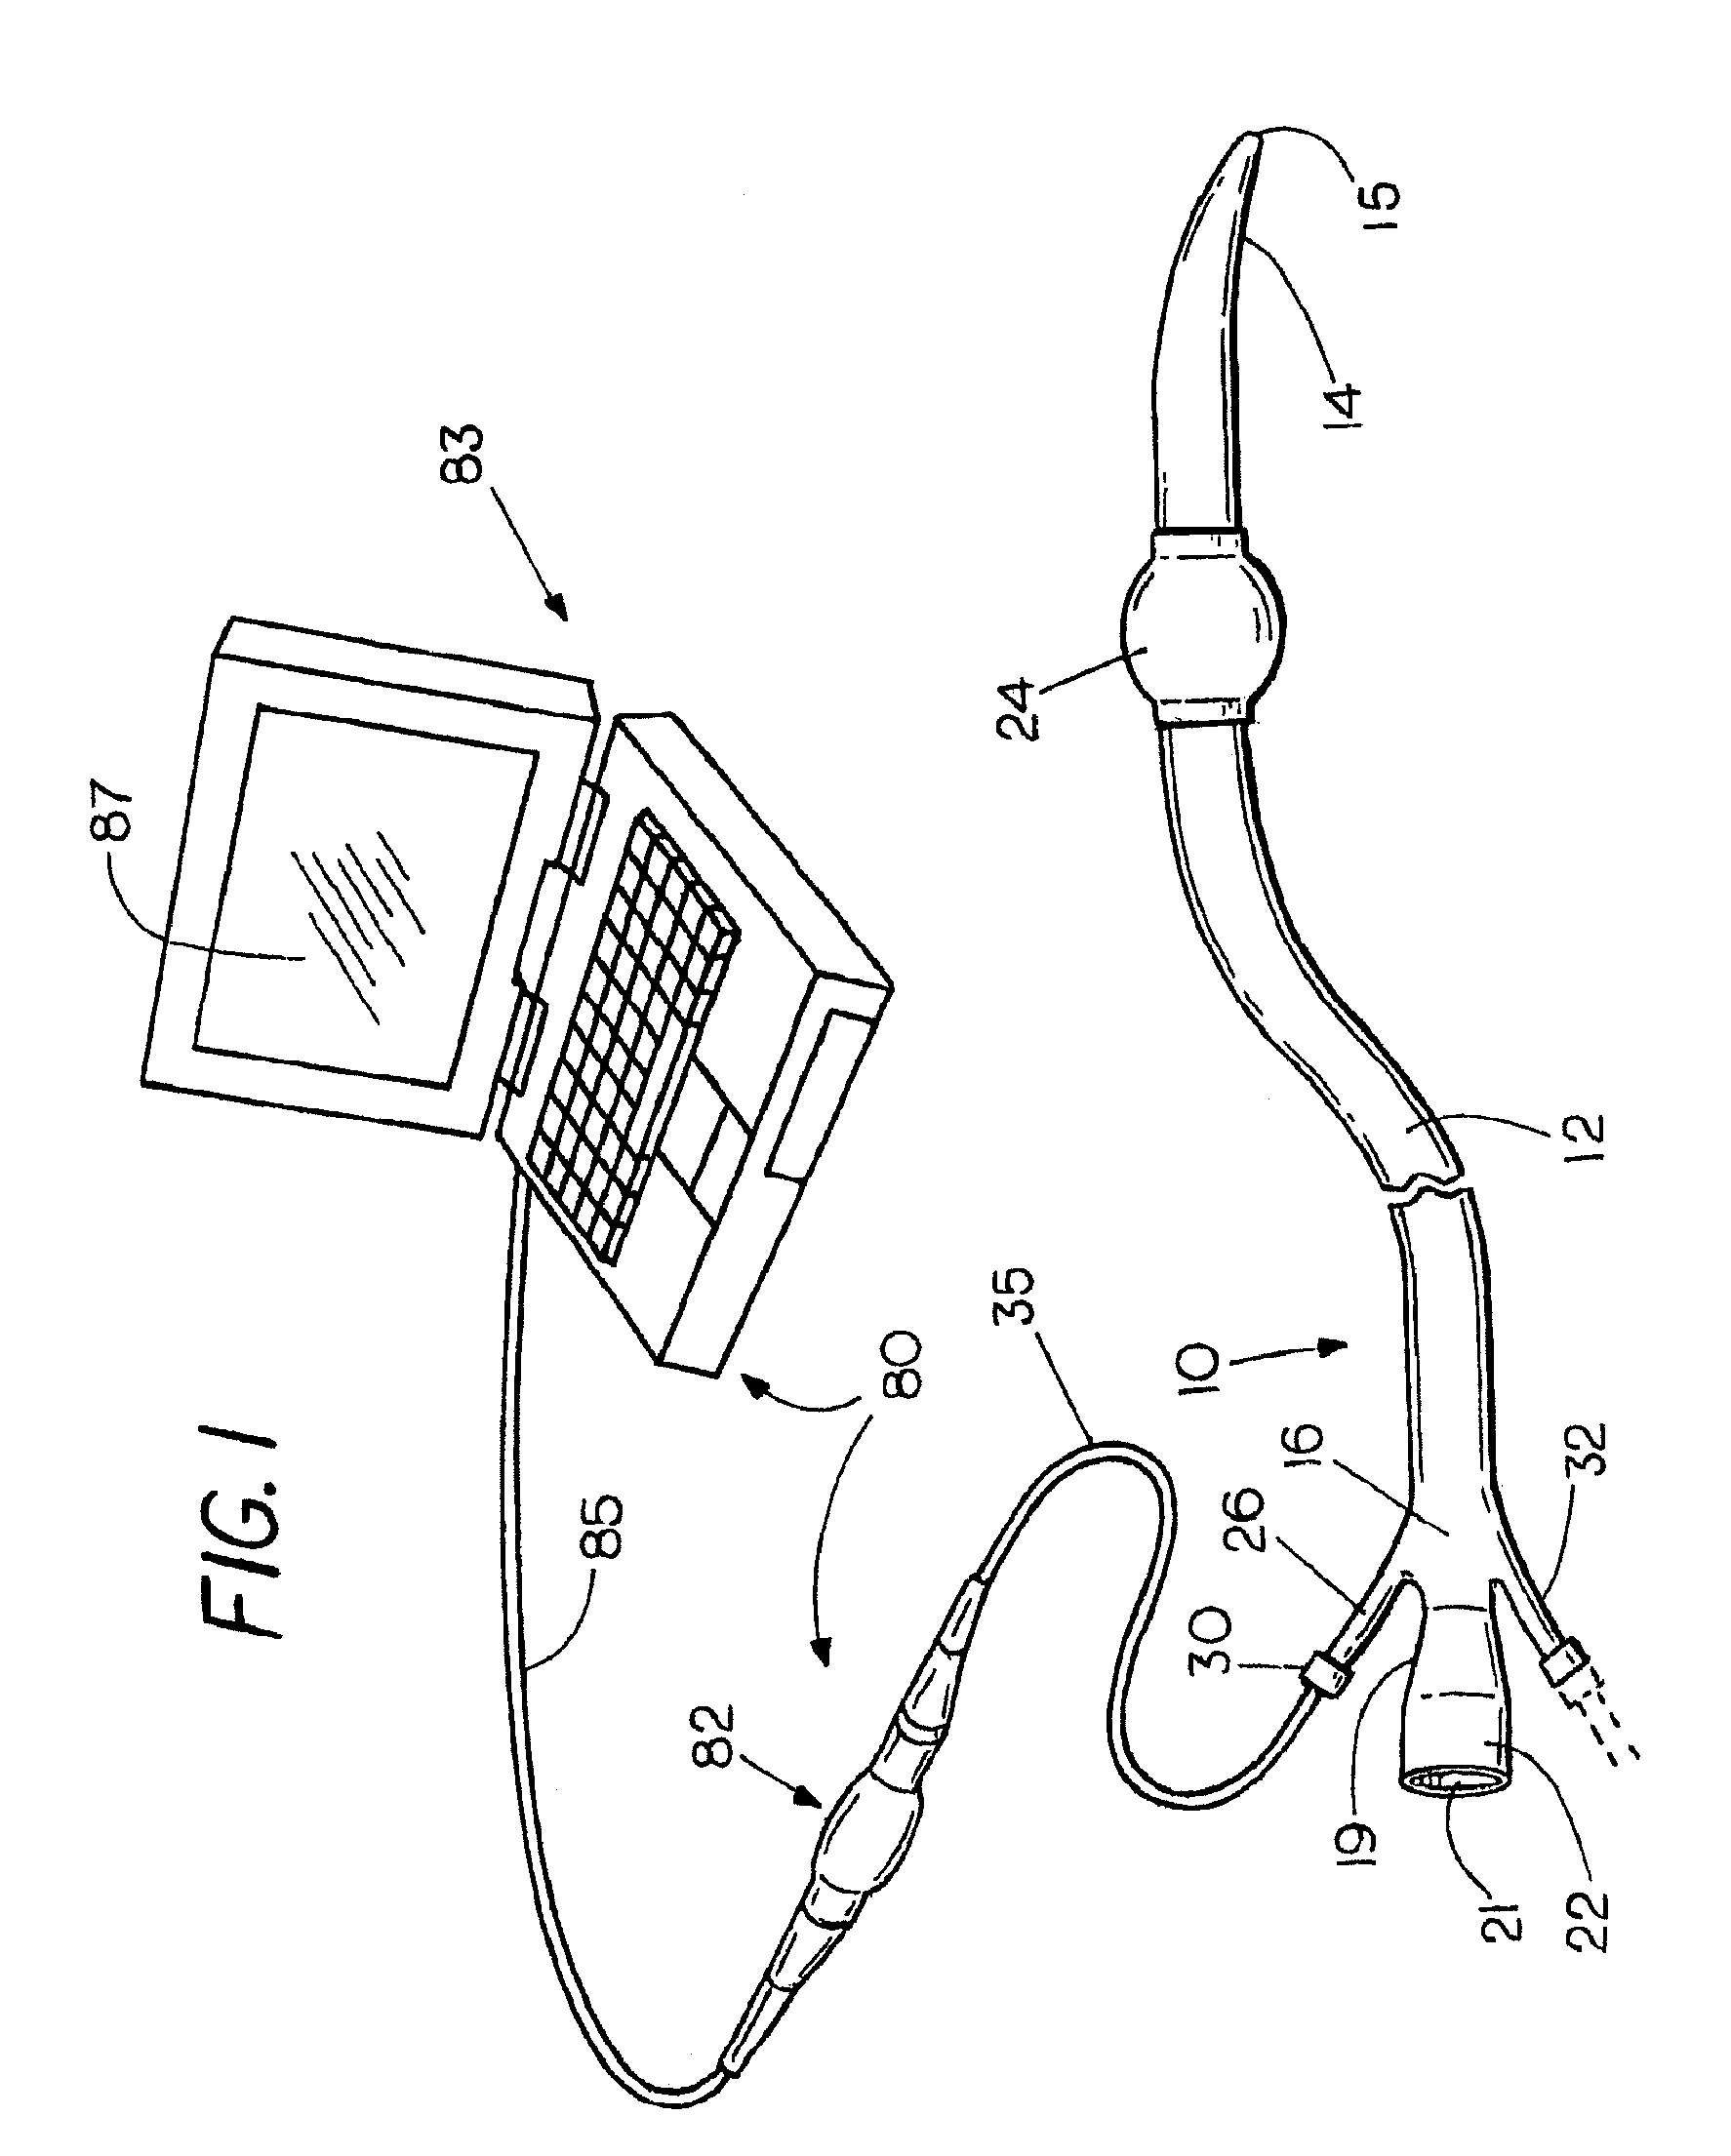 Flexible visually directed medical intubation instrument and method